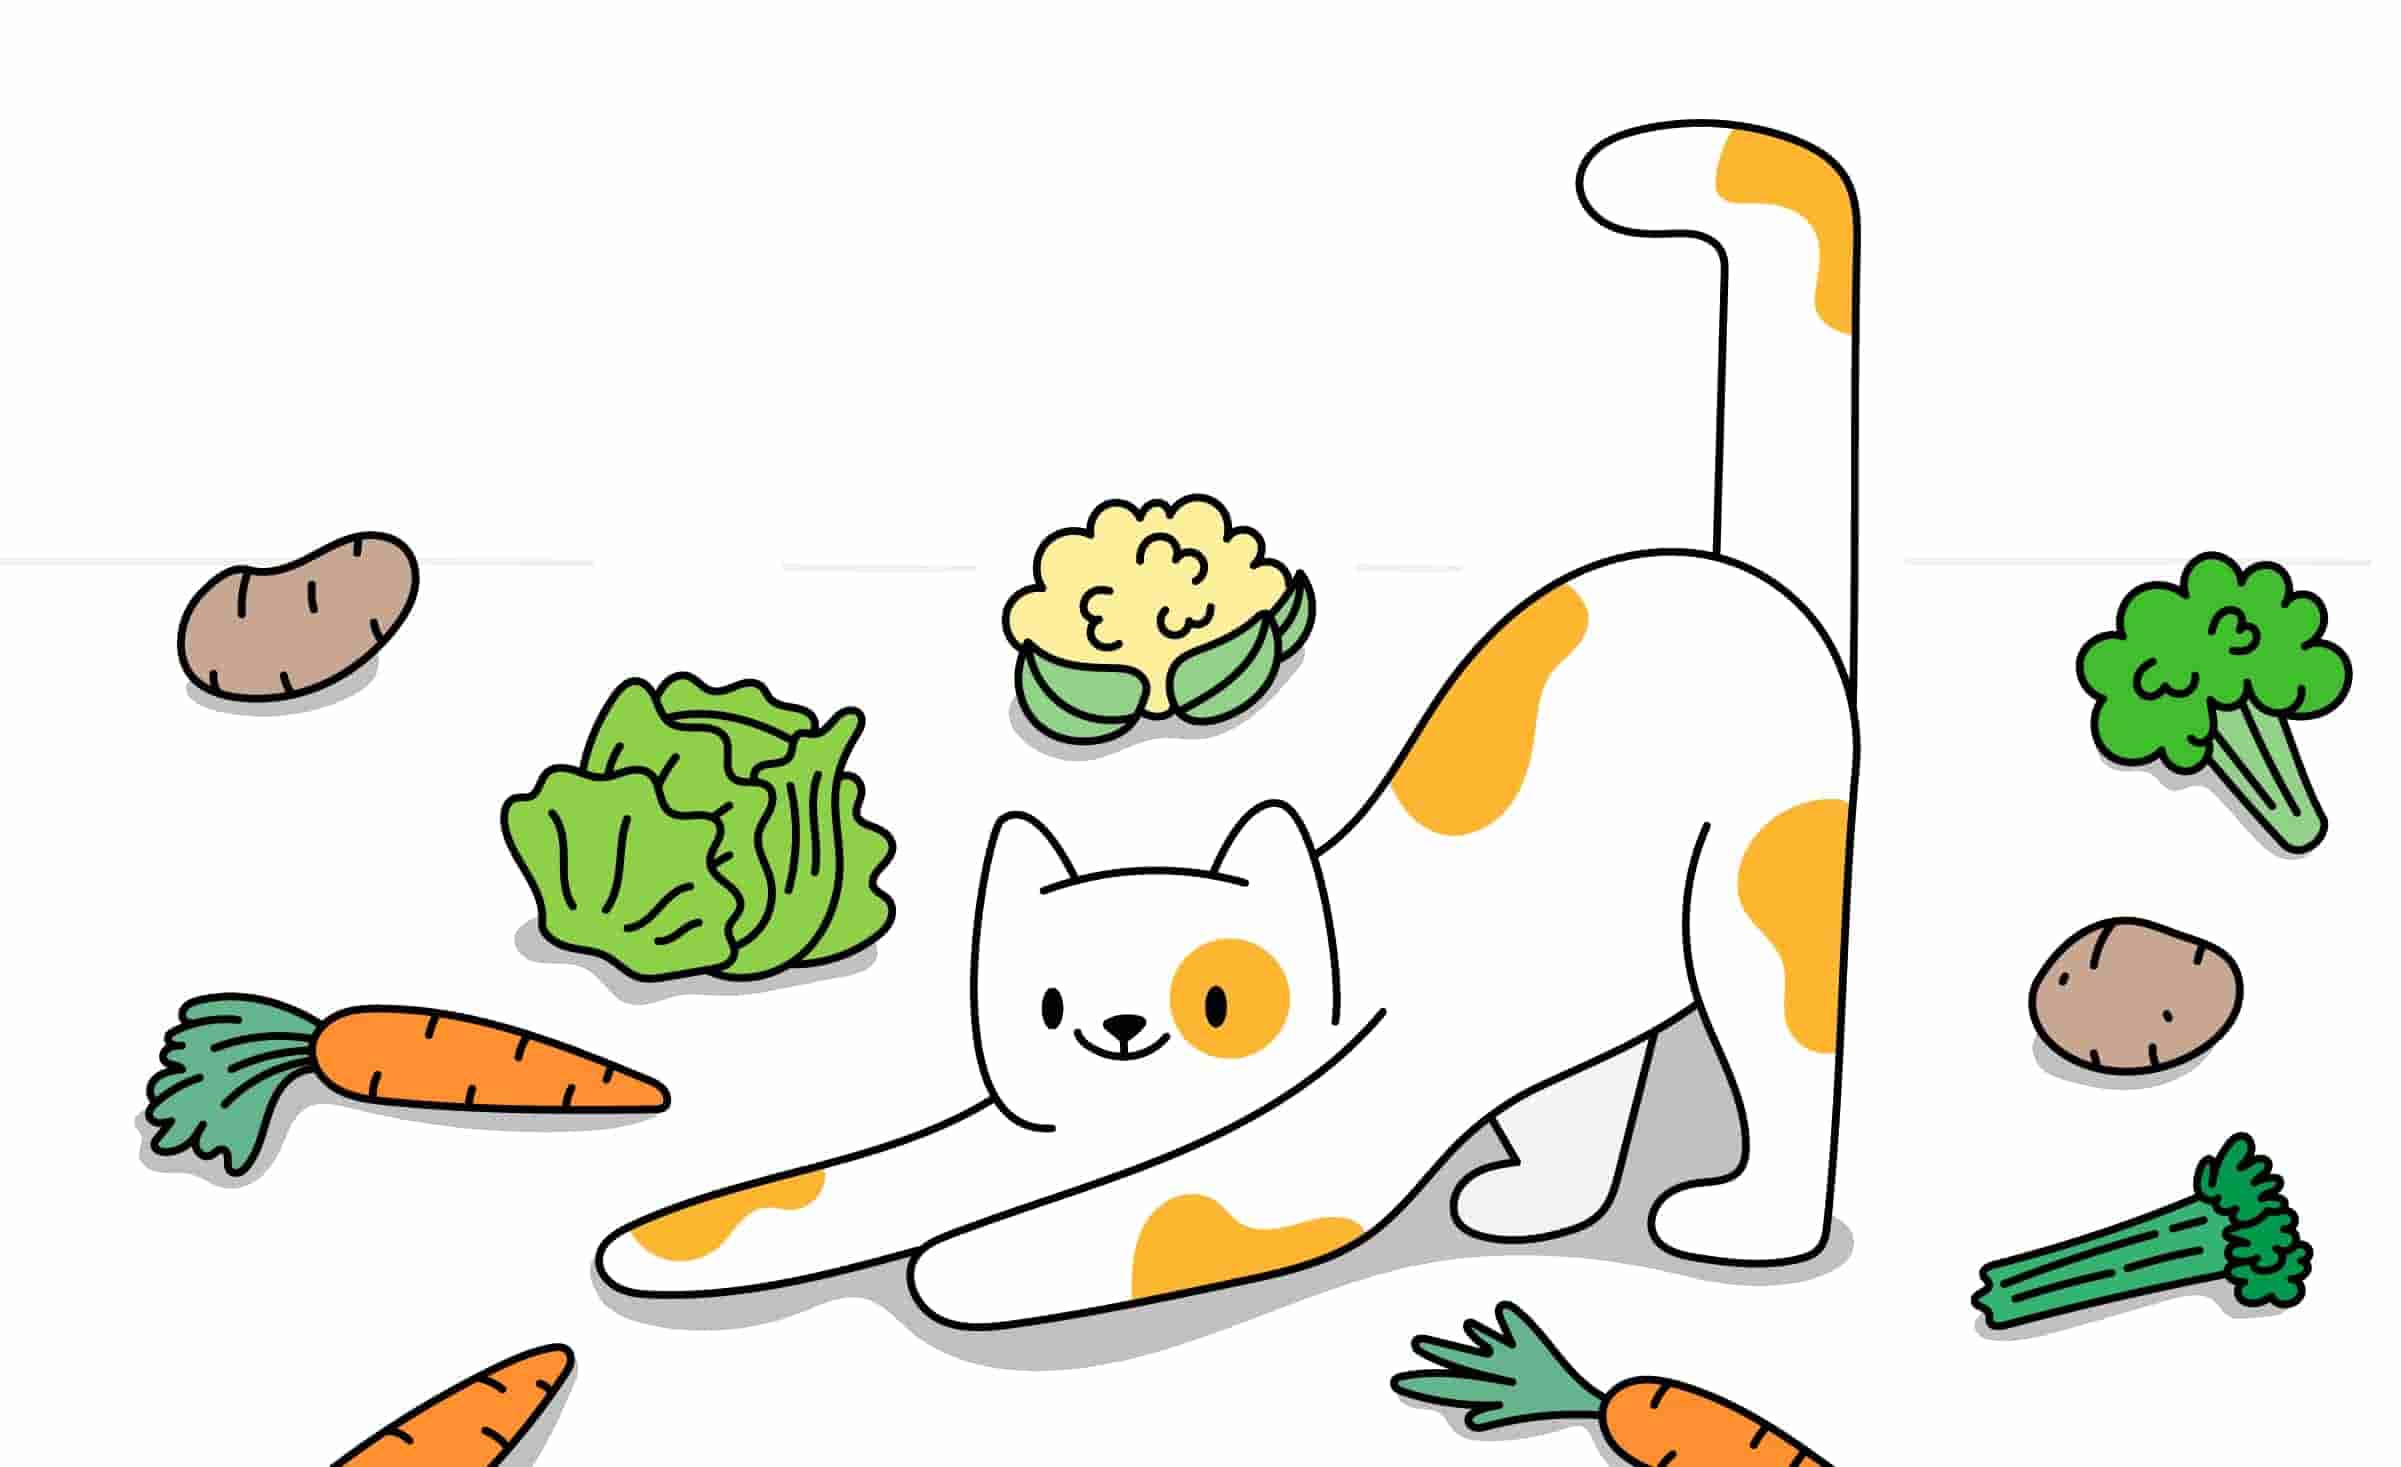 Can Cats Eat Potatoes, Carrots, Broccoli and Other Vegetables?